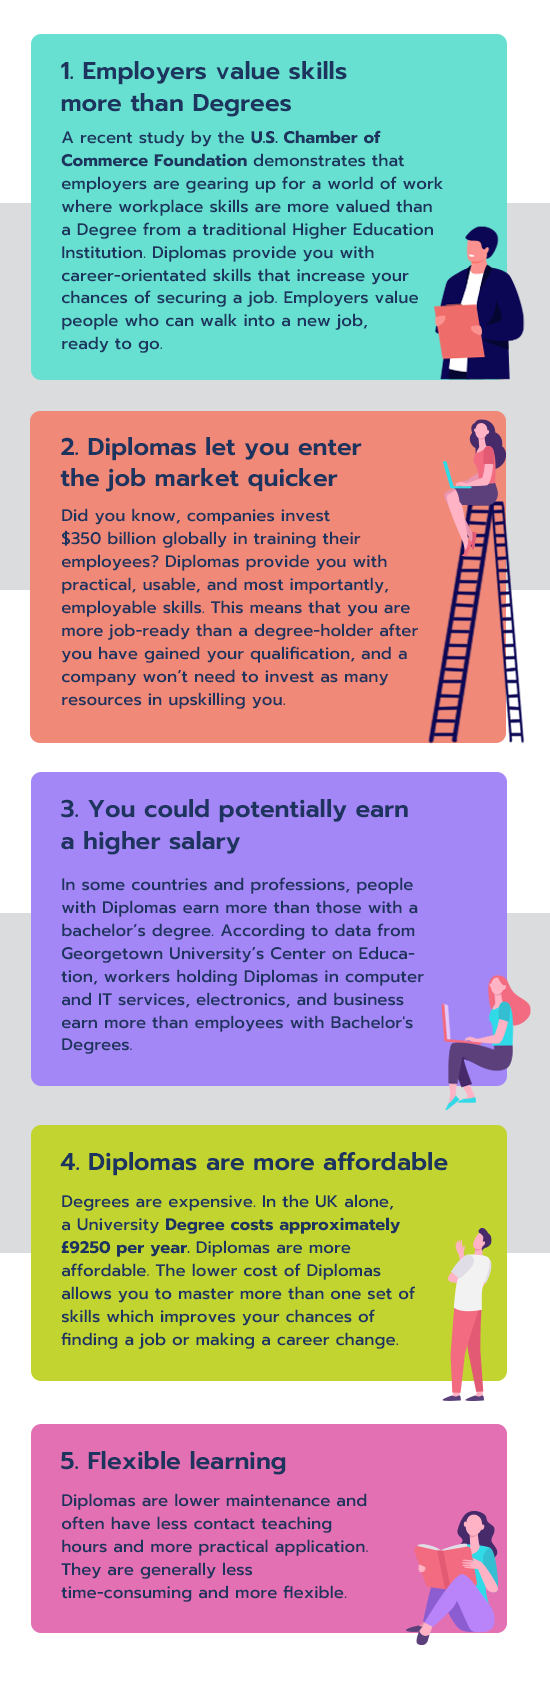 Five Benefits of studying a Diploma Course - 1. Employers value skills more than Degrees, 2. Diplomas let you enter the job market quicker, 3. You could potentially earn a higher salary, 4. Diplomas are more affordable, 5. Flexible learning.